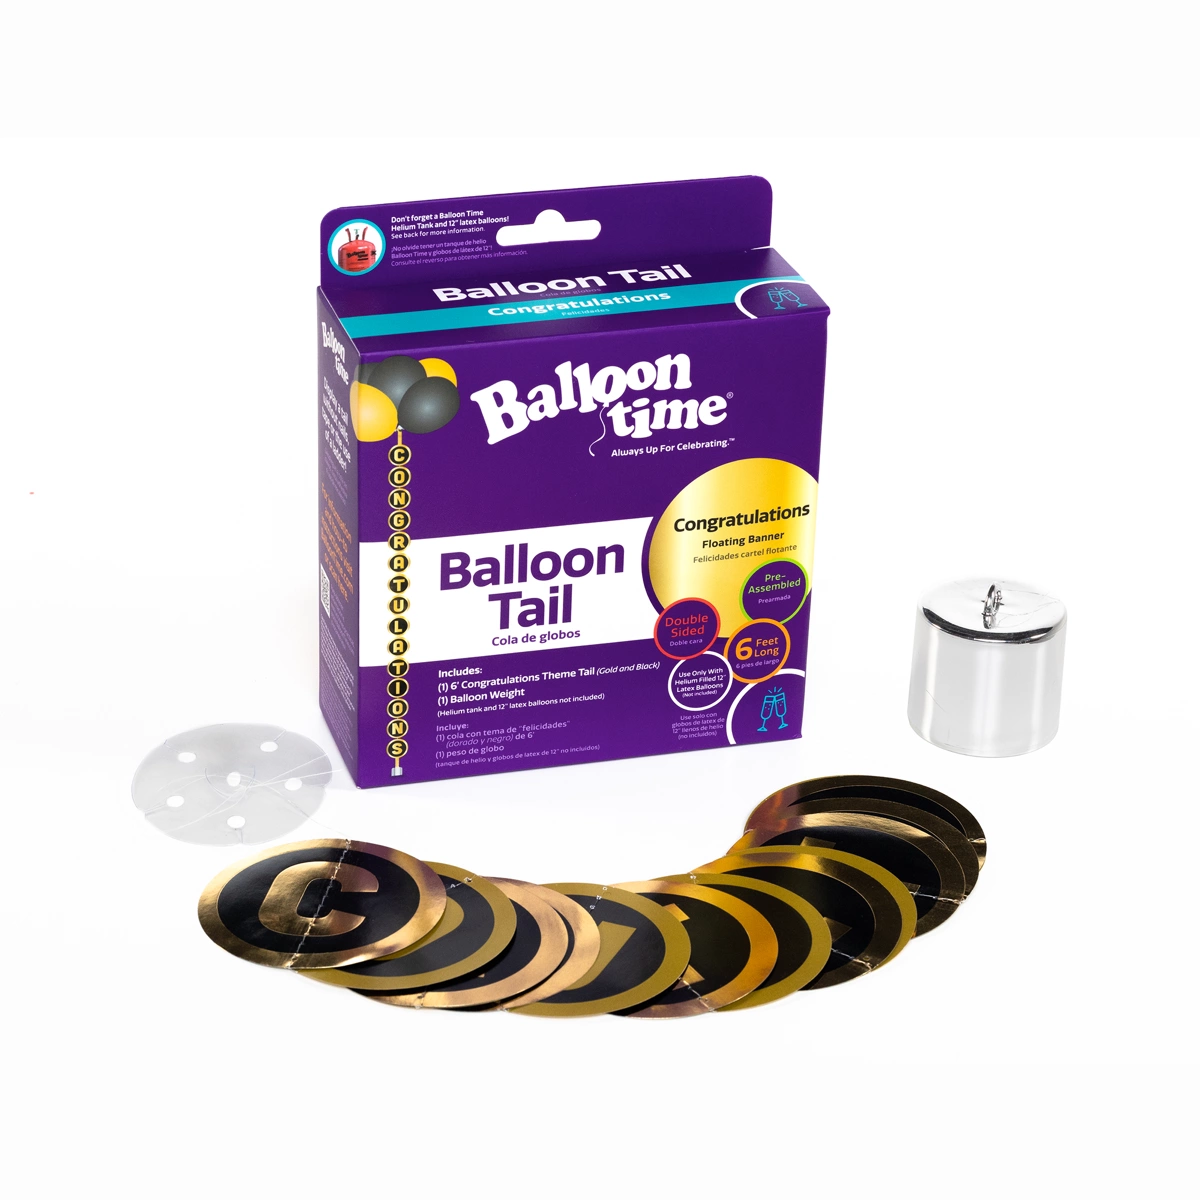 Congratulations Balloon Tail Box with tail and weight